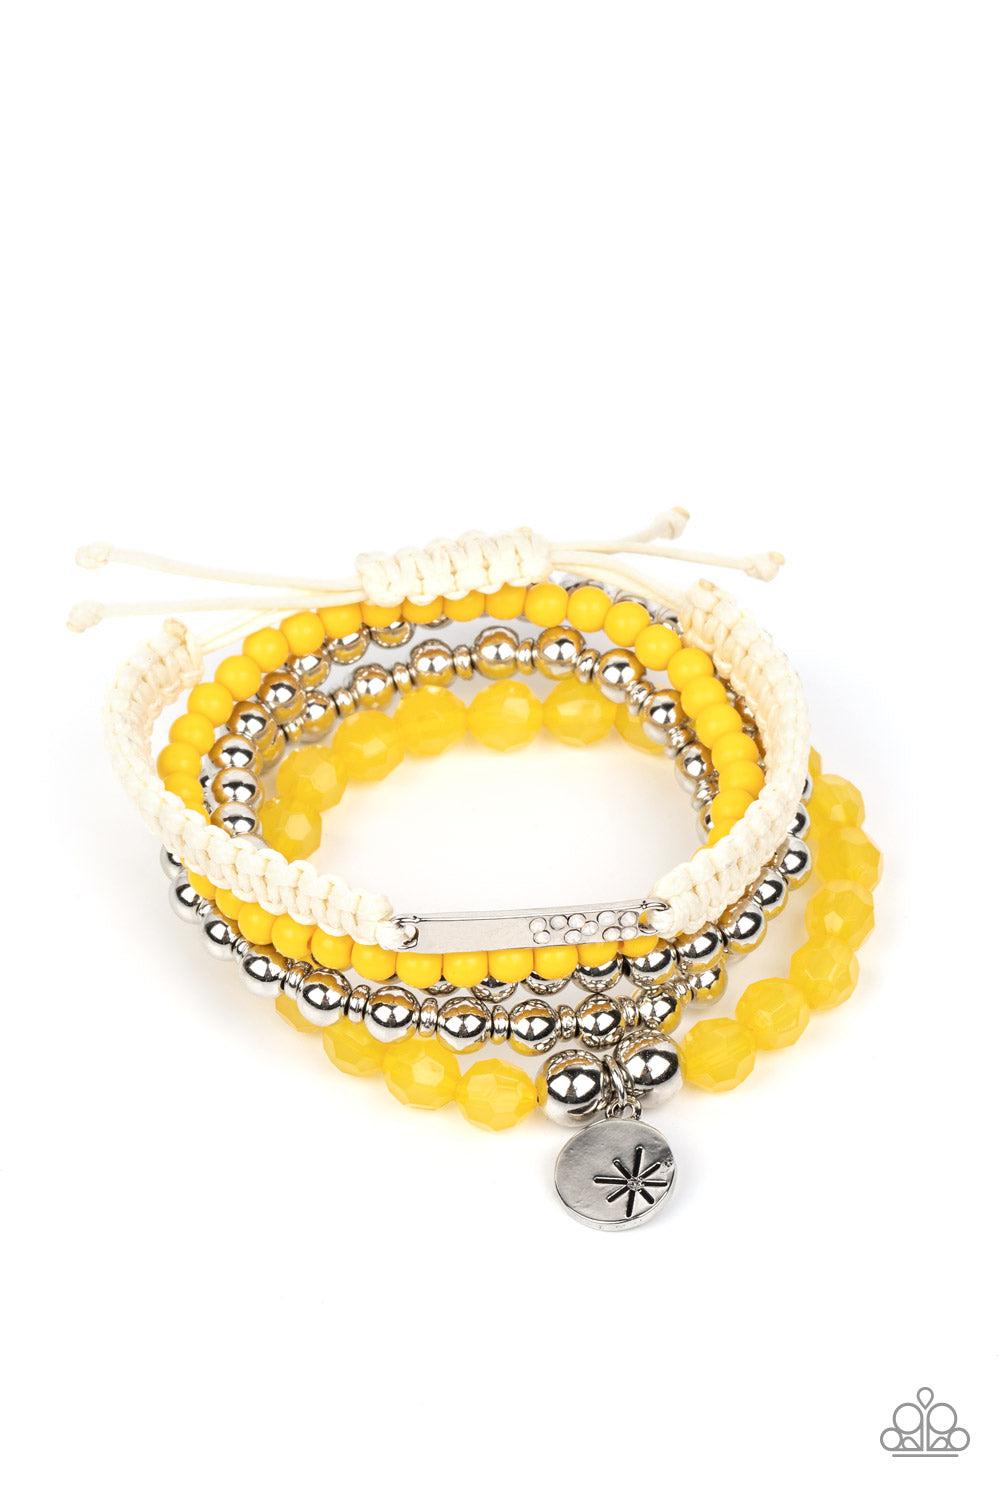 Offshore Outing Yellow &amp; Silver Bracelet Set - Paparazzi Accessories- lightbox - CarasShop.com - $5 Jewelry by Cara Jewels